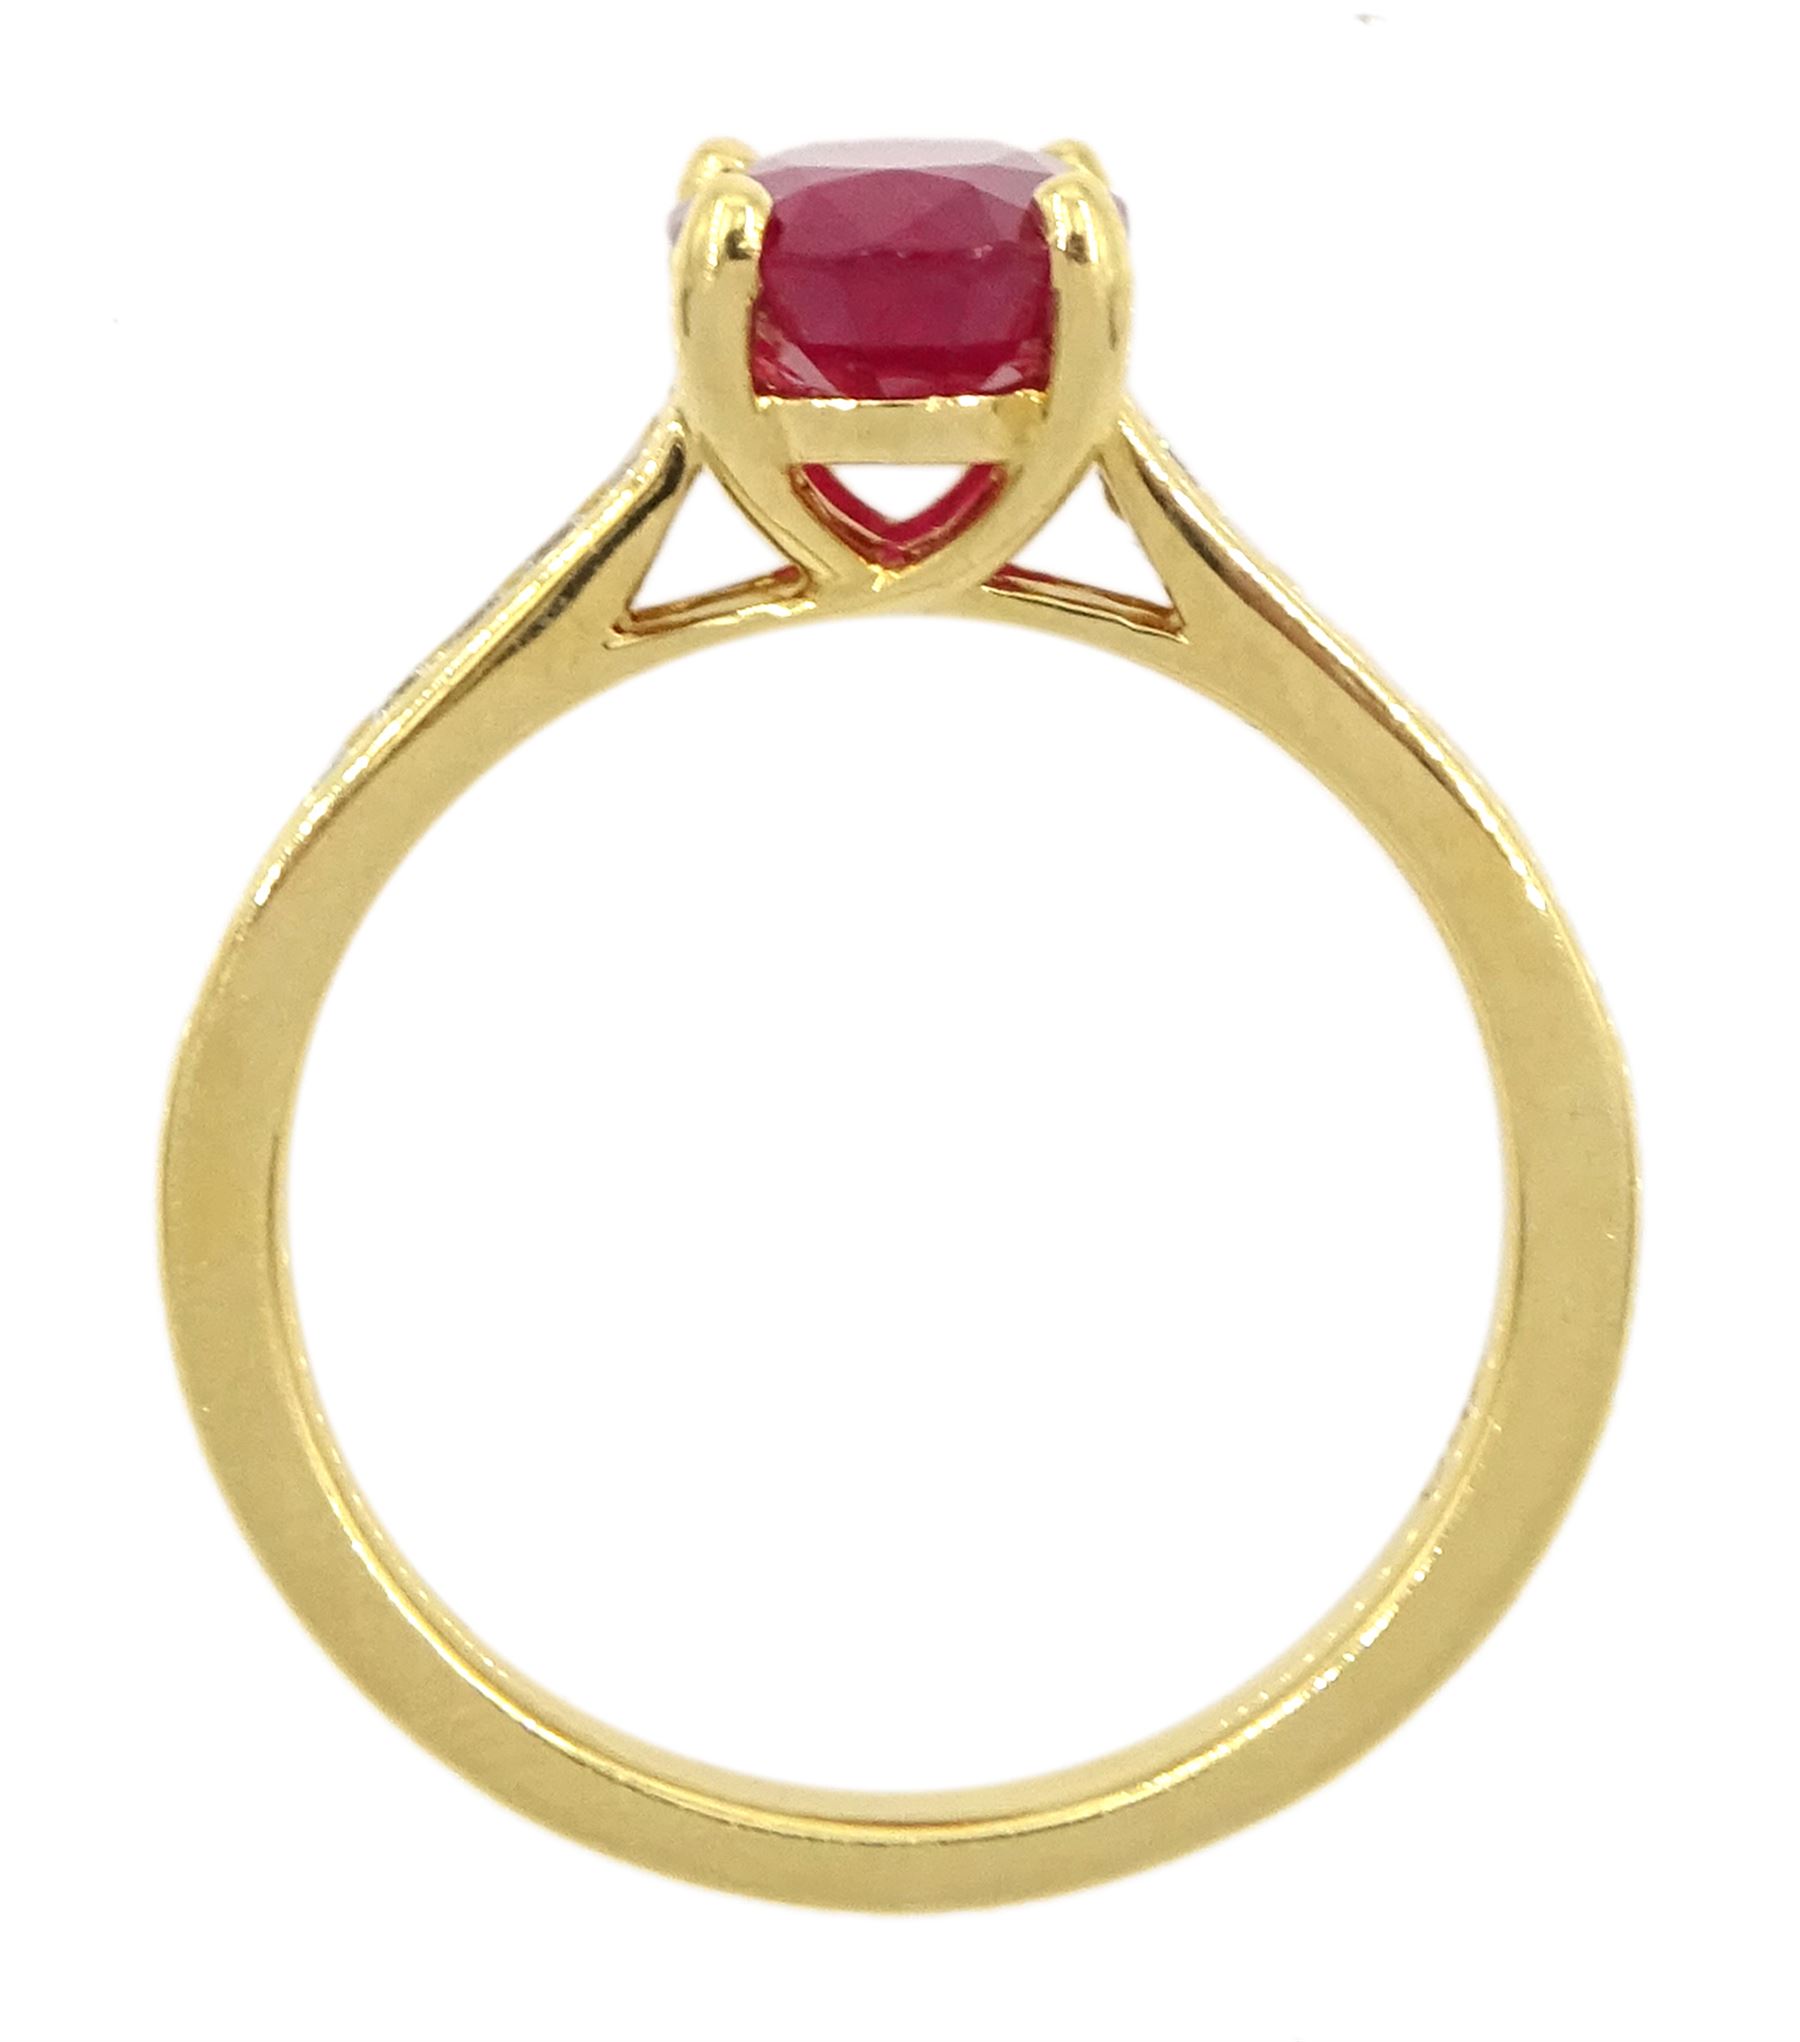 18ct gold oval ruby ring - Image 4 of 7